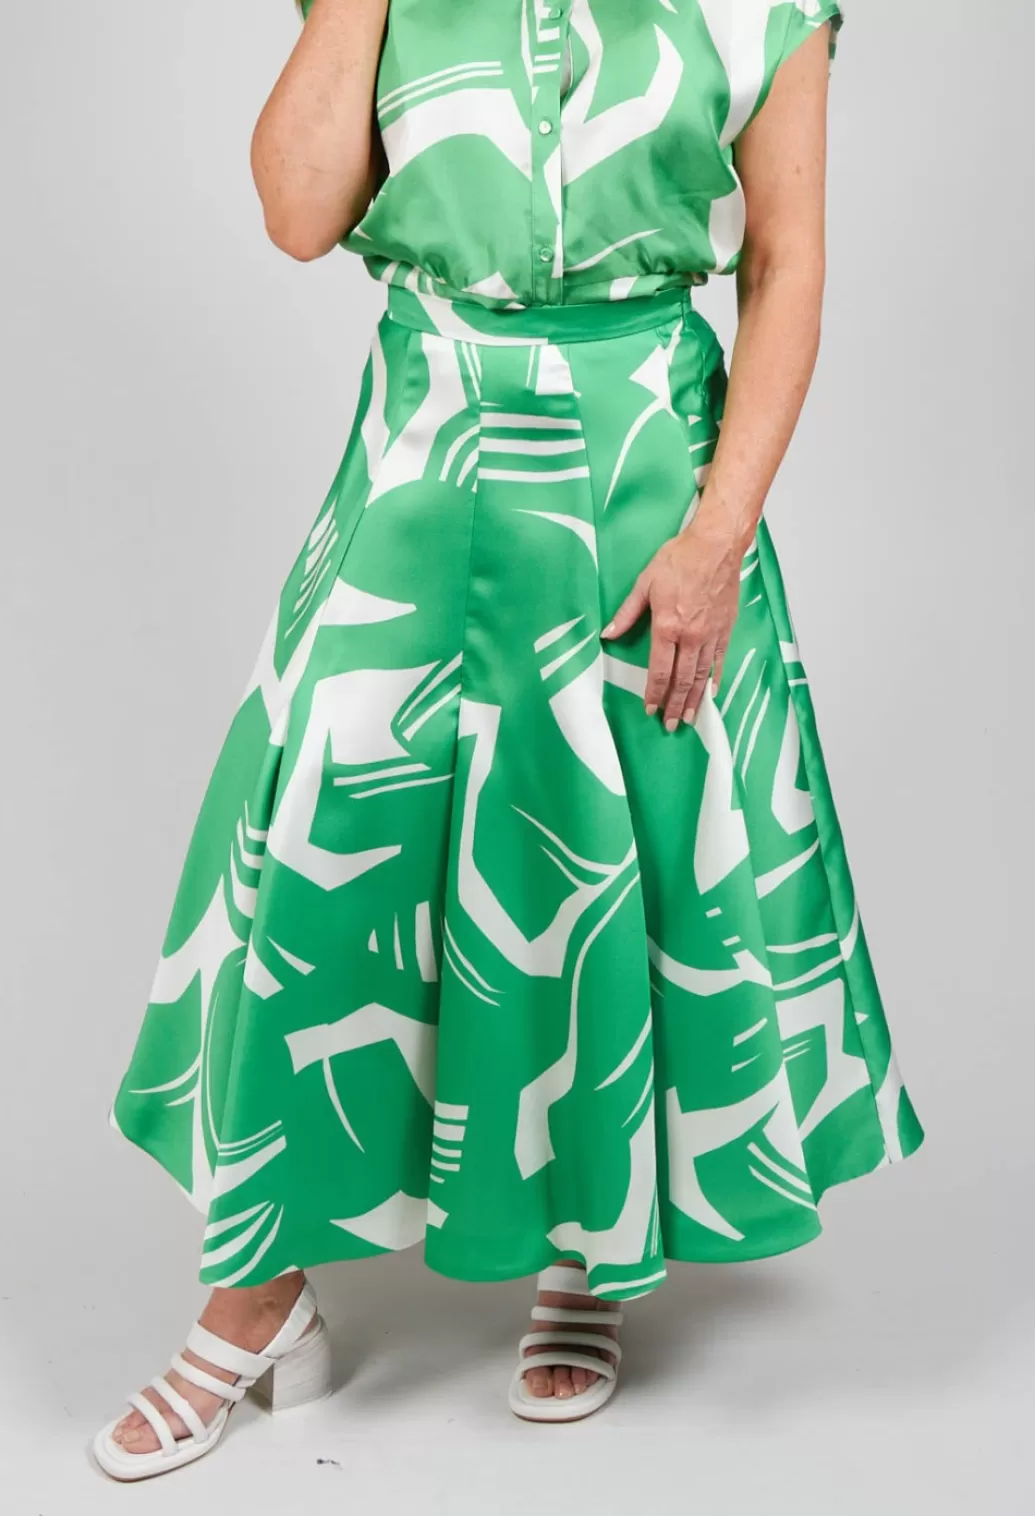 Skirts^Beatrice B A-Line Pleated Skirt In Green Matisse